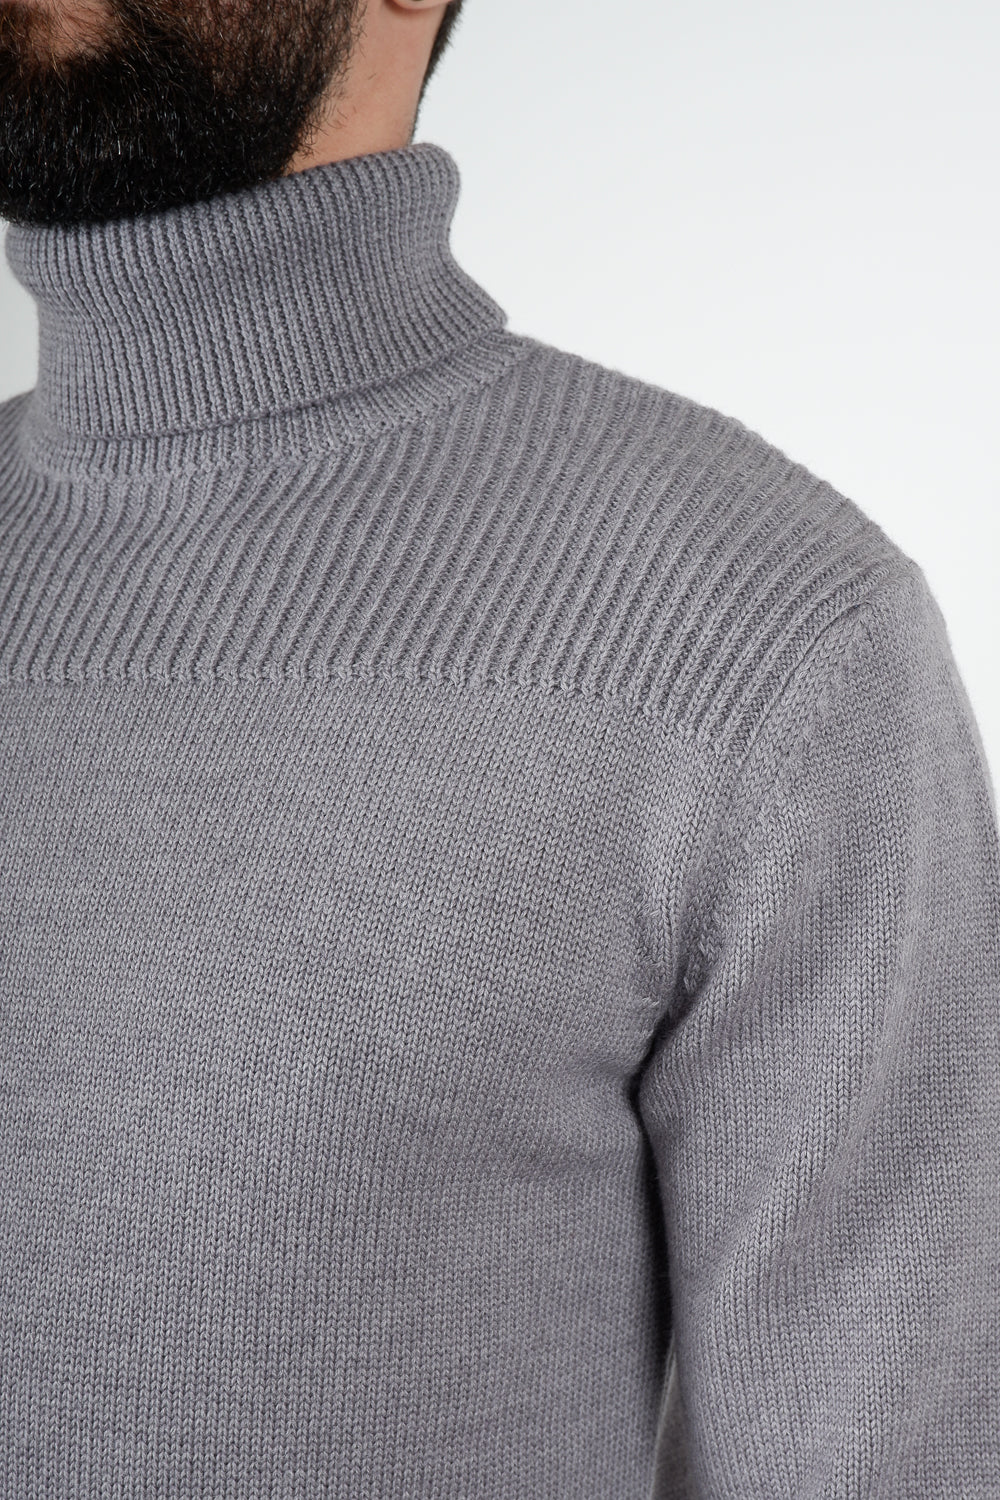 Buy the Daniele Fiesoli Front Design Turtle Neck Grey at Intro. Spend £50 for free UK delivery. Official stockists. We ship worldwide.